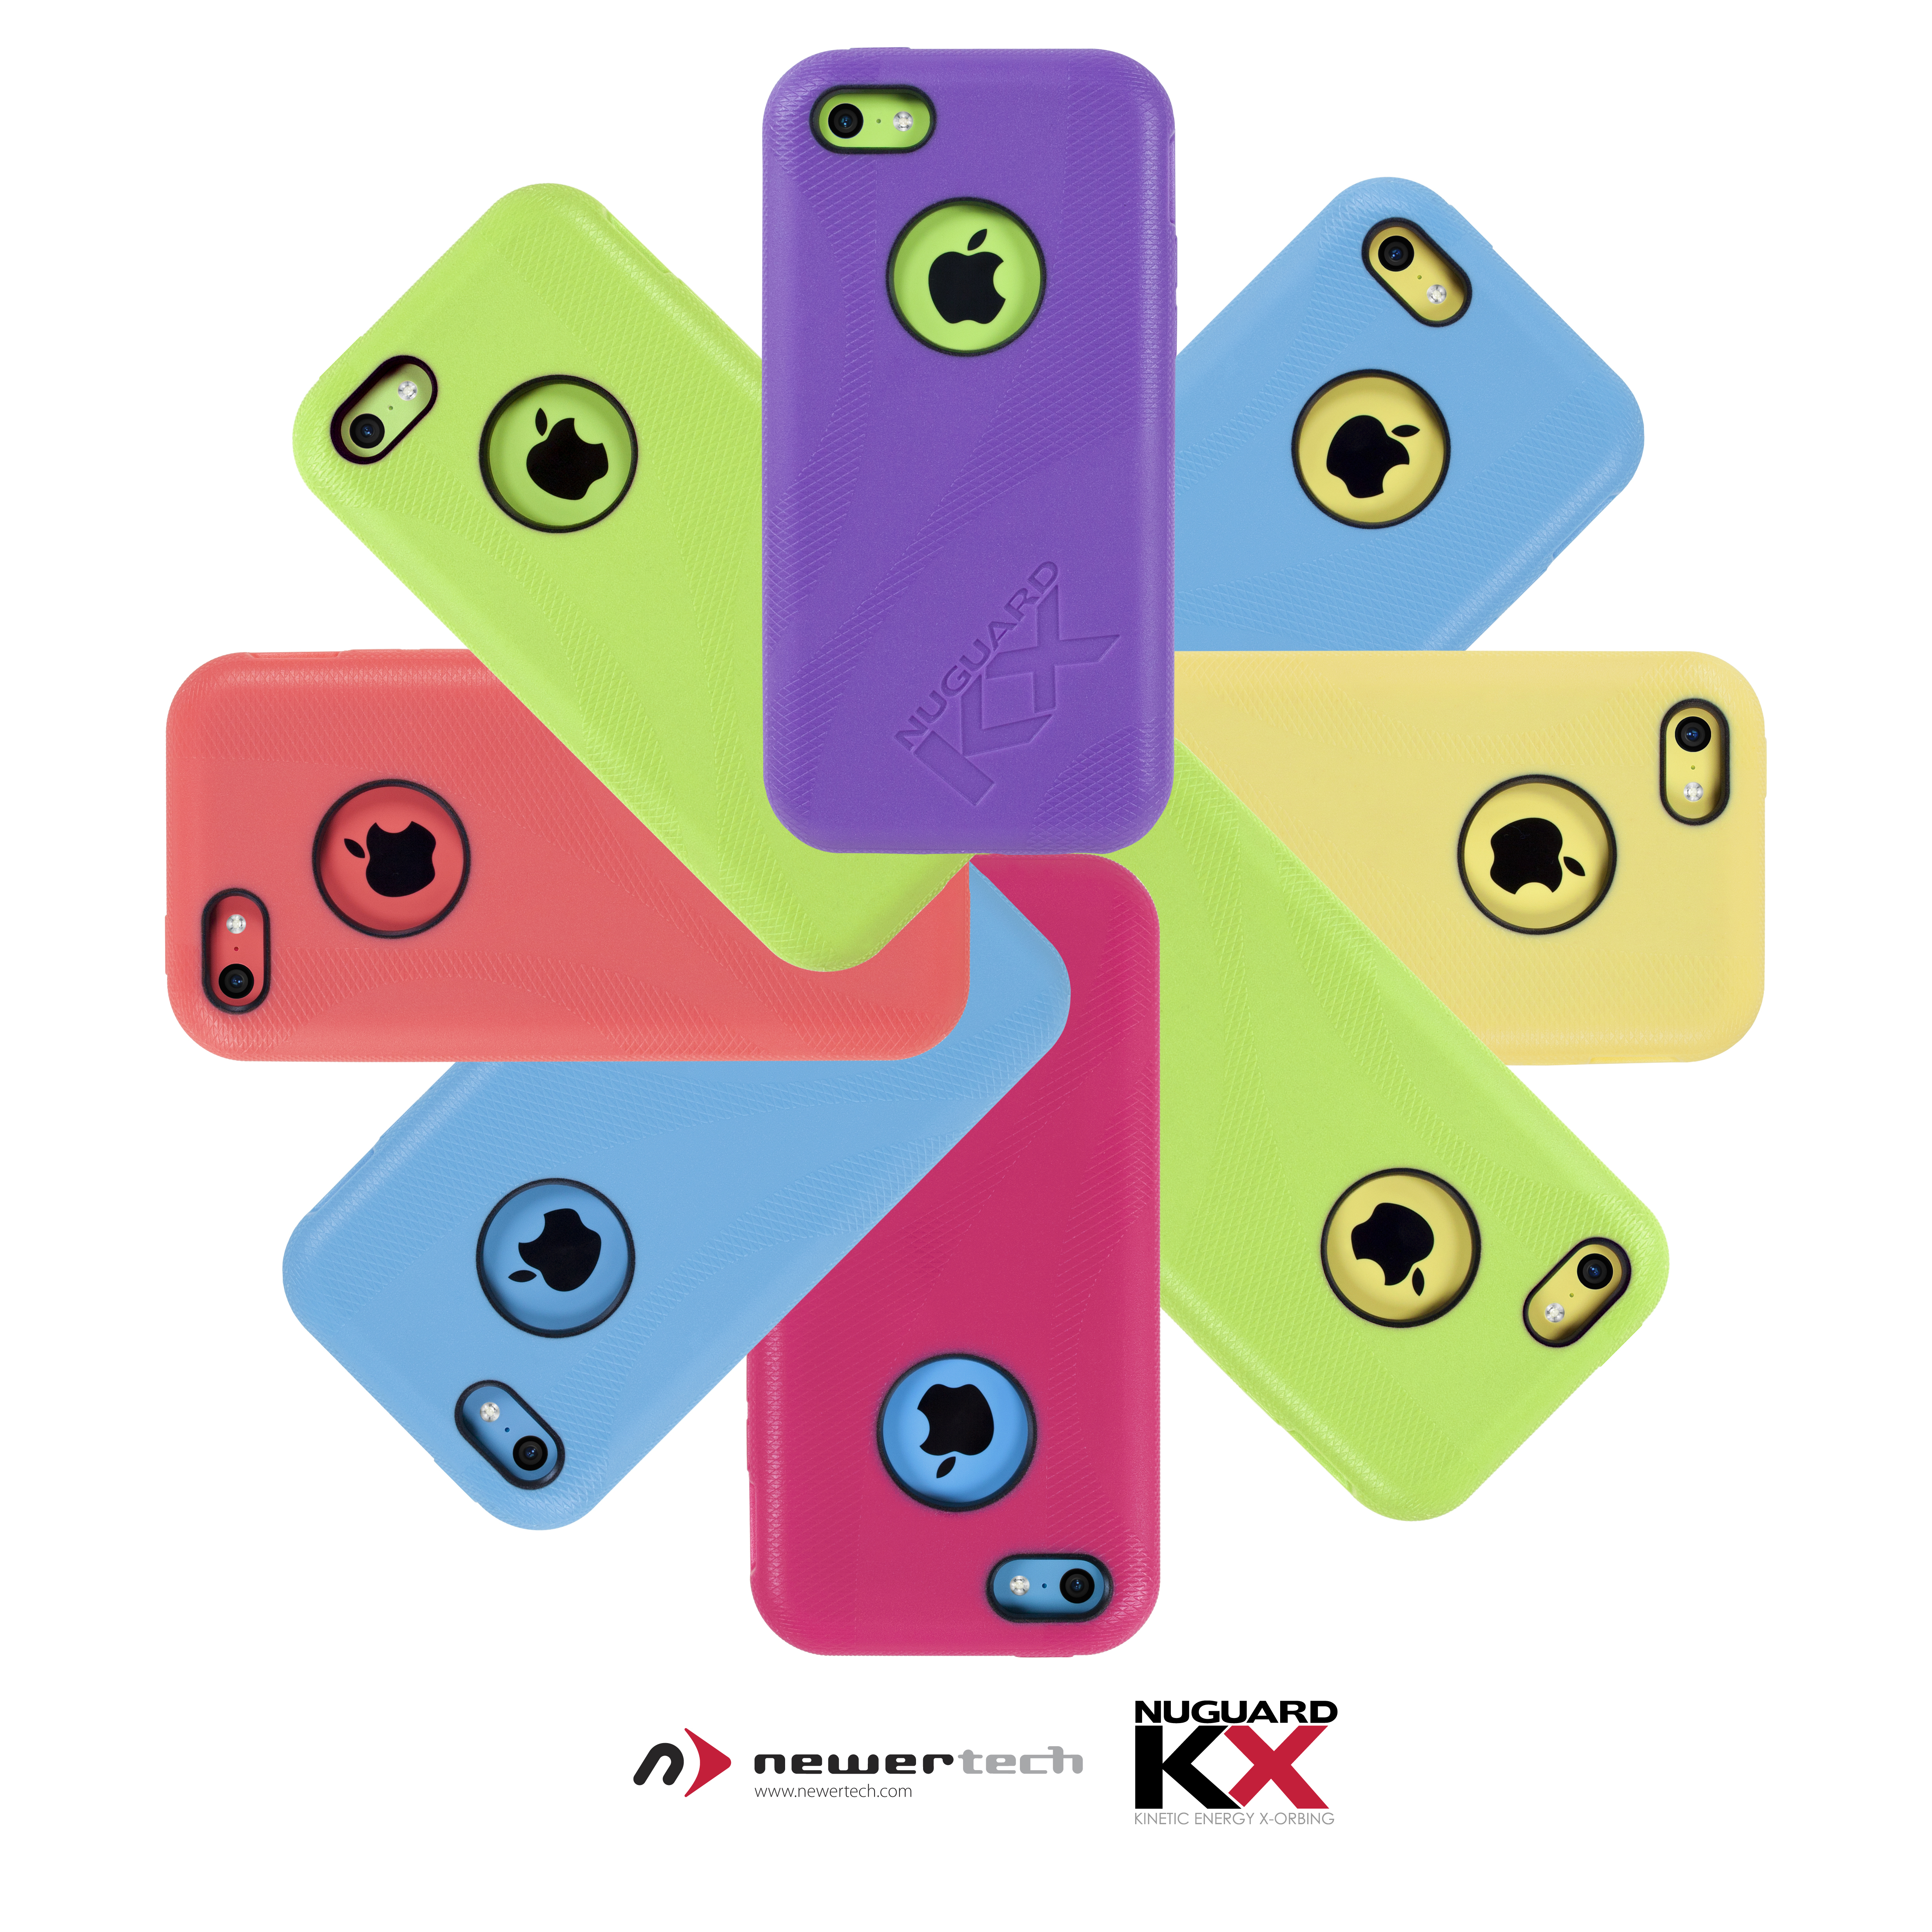 NewerTech Debuts NuGuard KX Case for iPhone 5C at CES